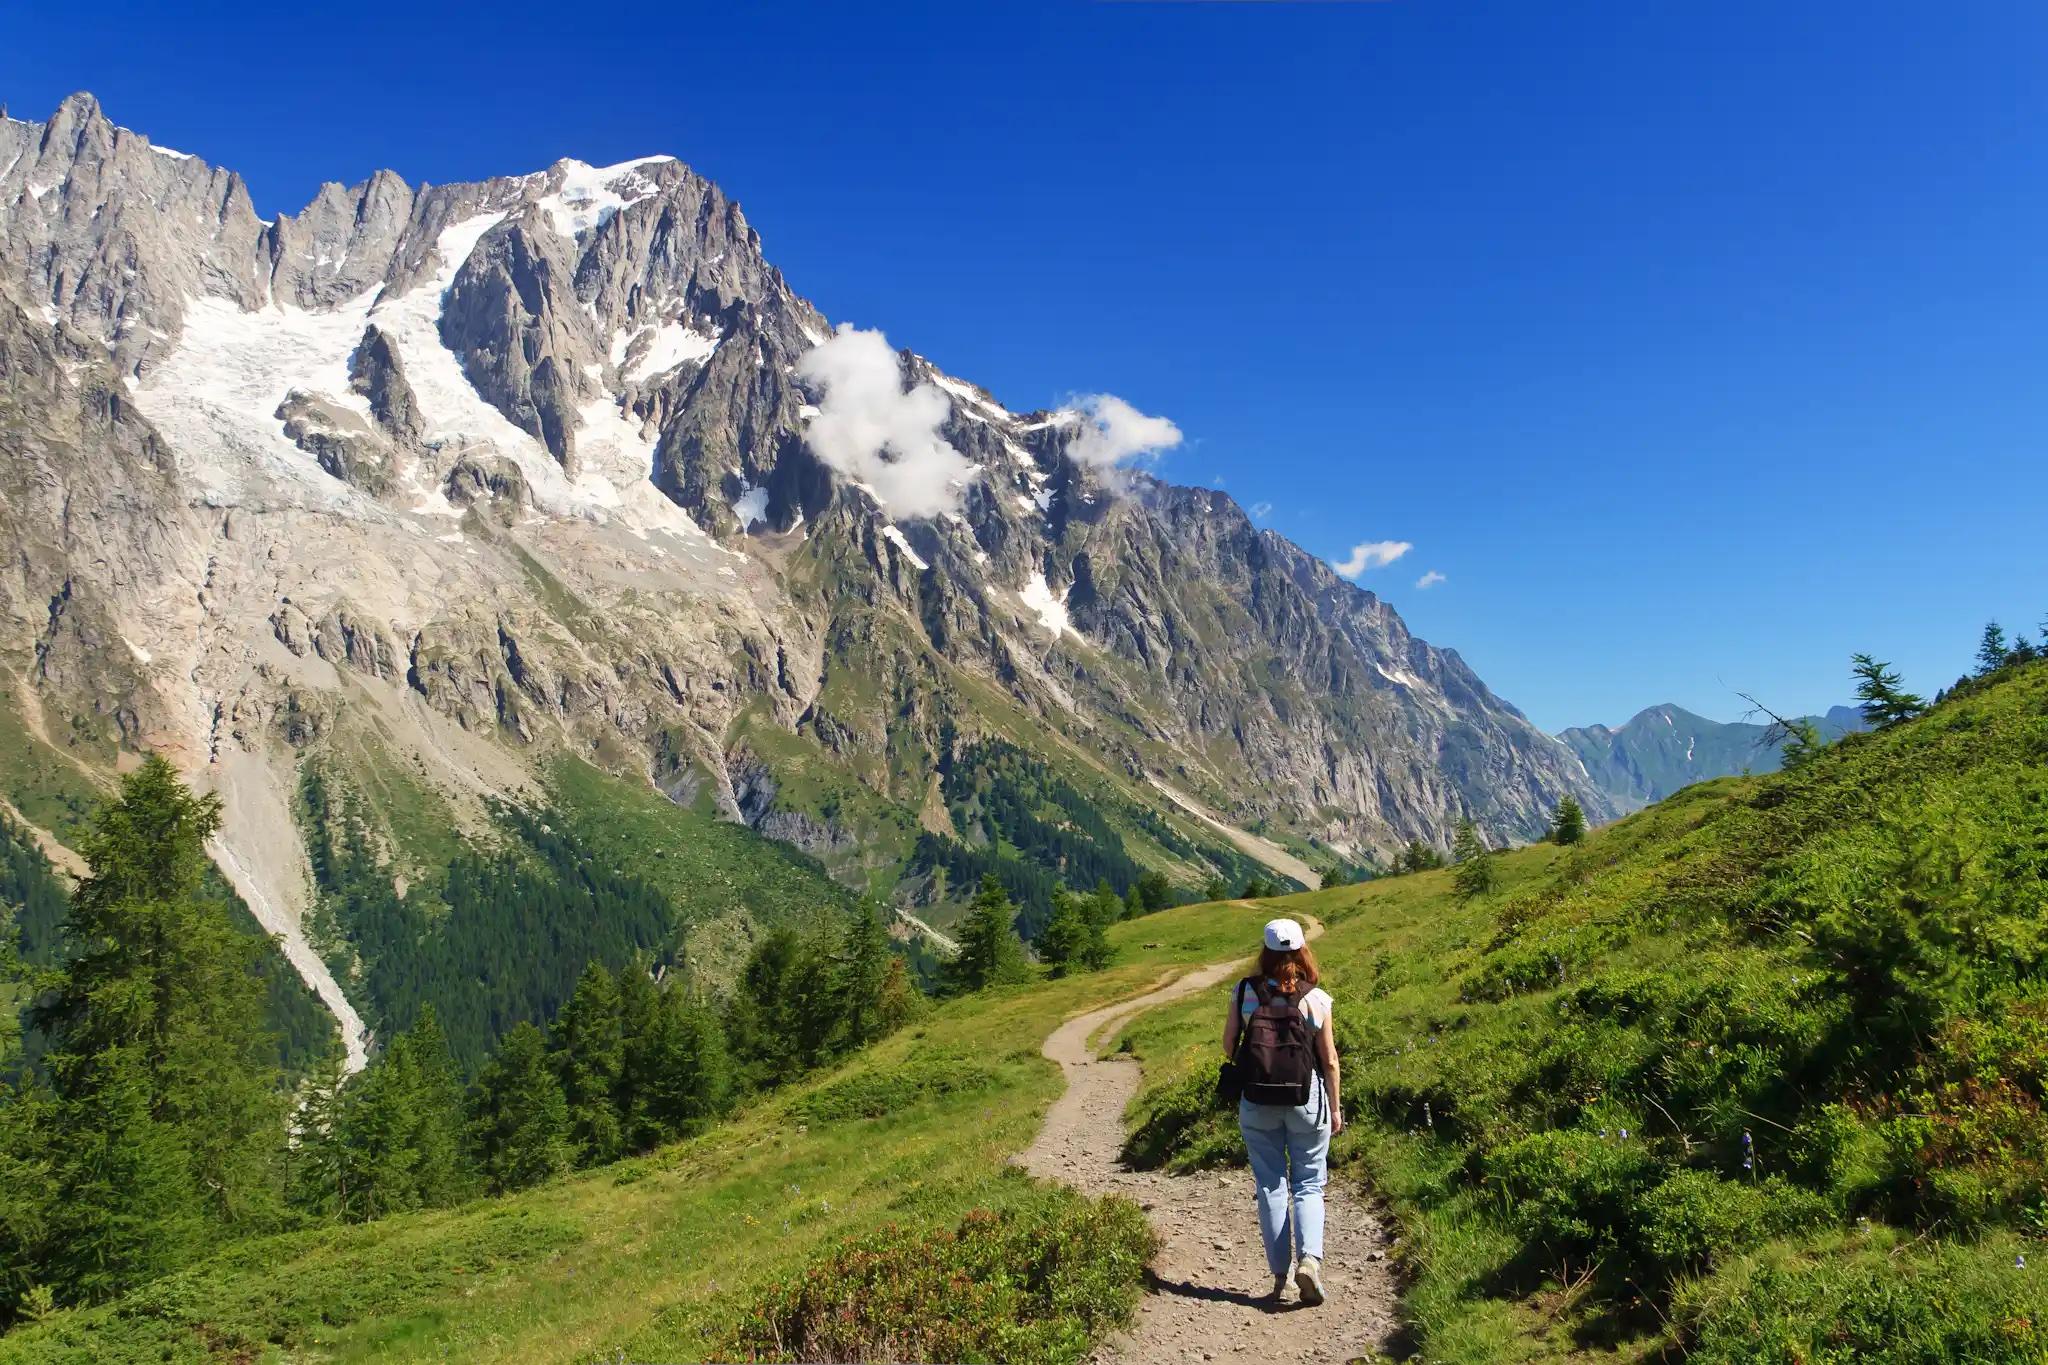 Gorgeous views of the Mont Blanc massif, with hiker walking a trail in the foreground